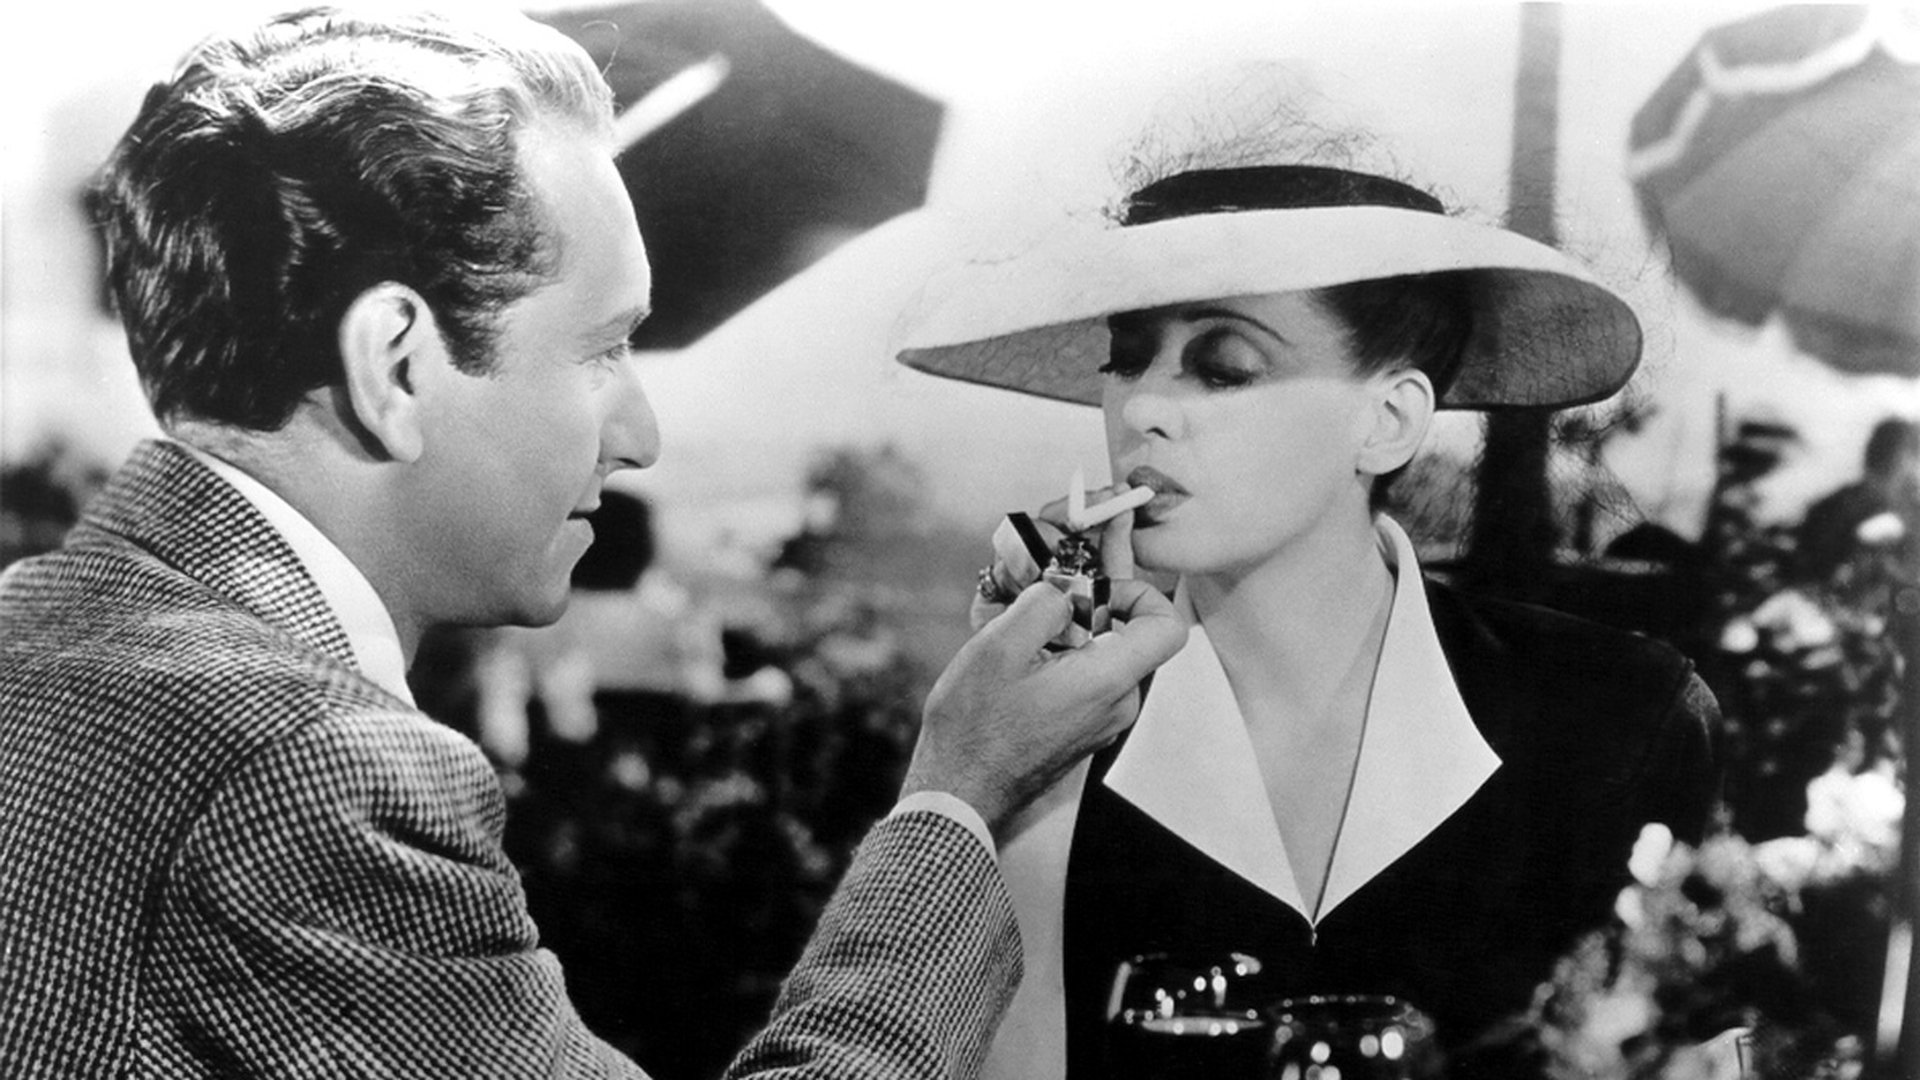 now voyager film